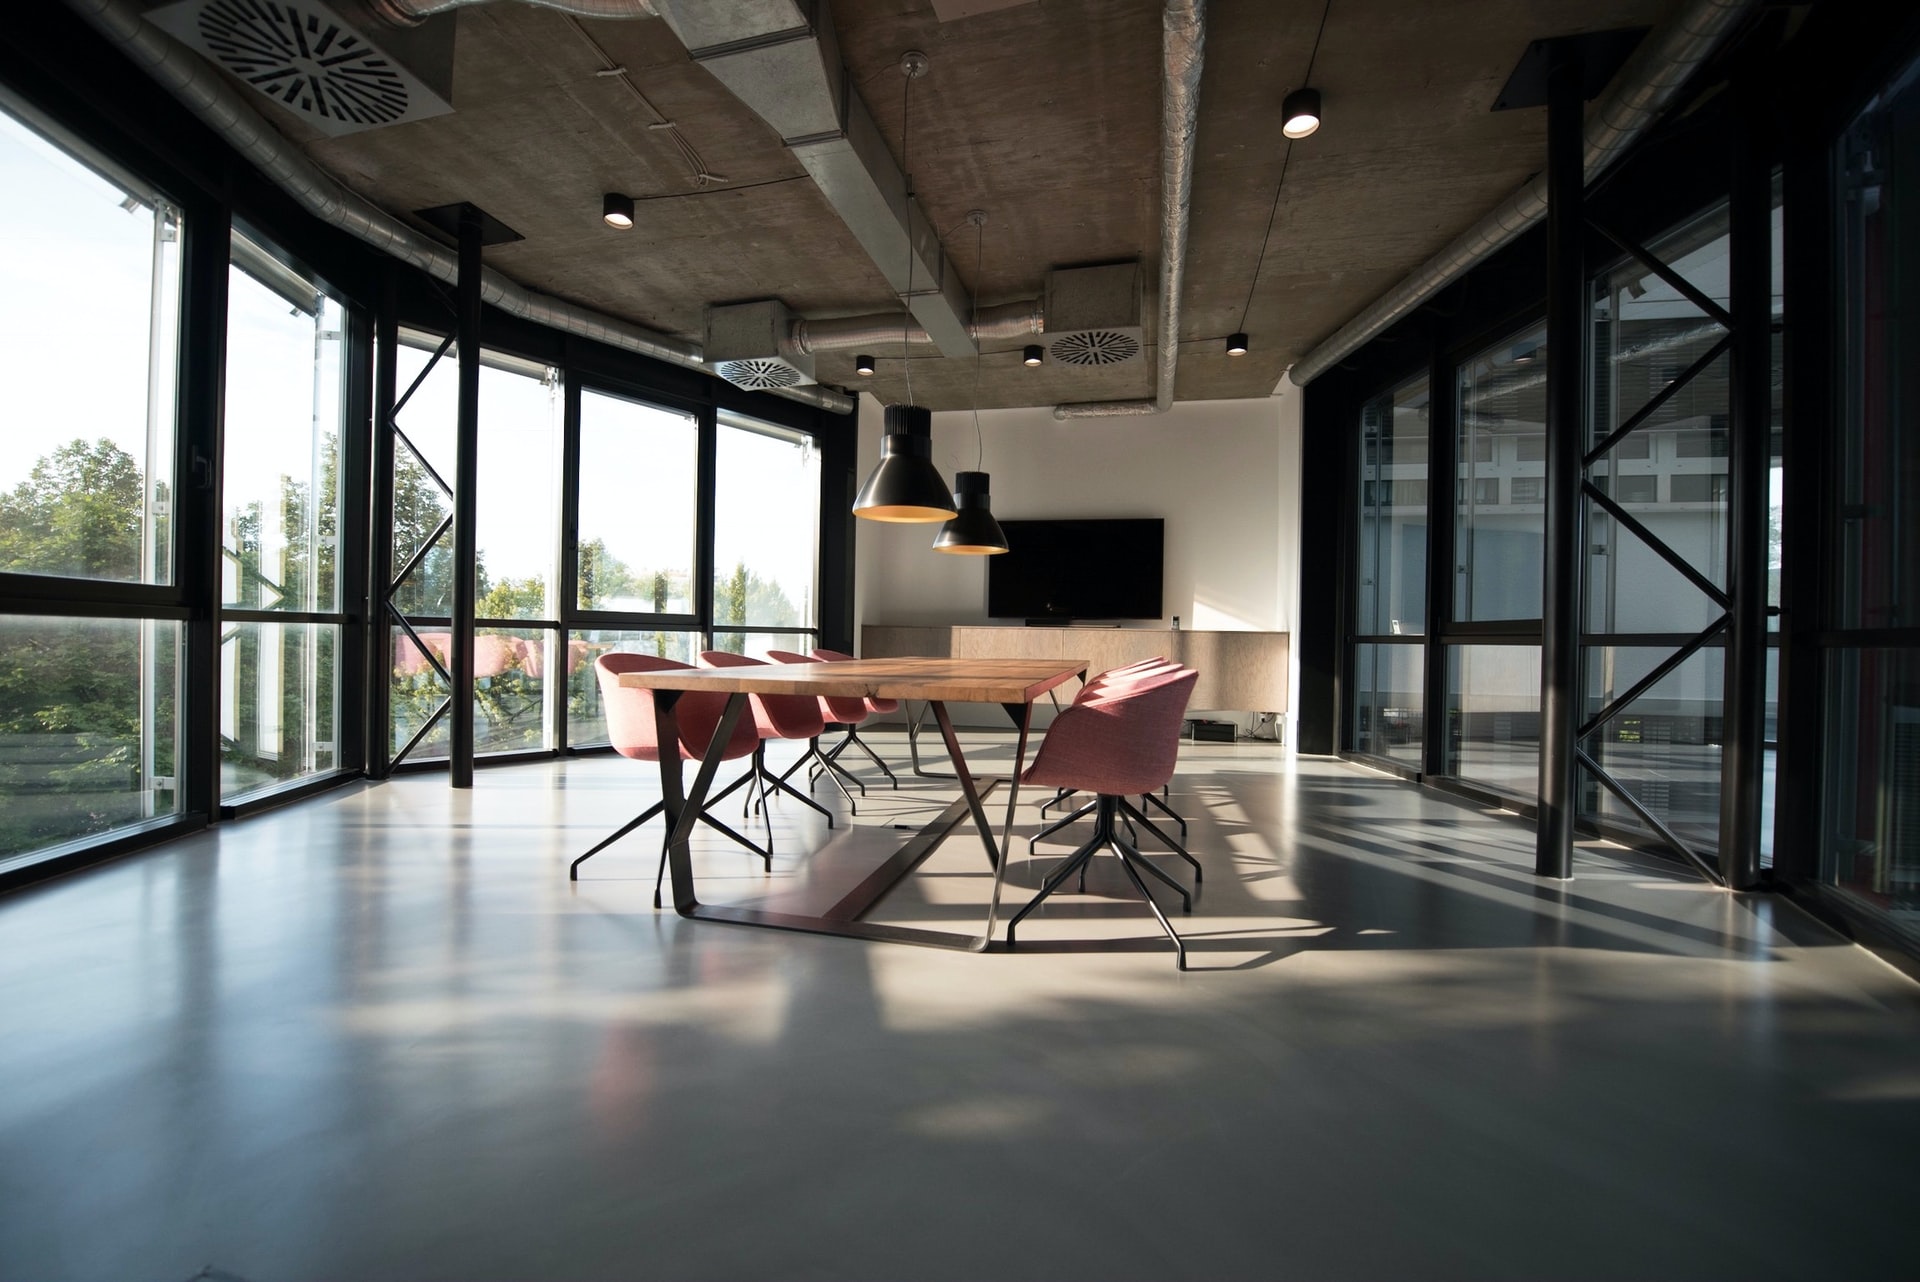 What to look for when choosing an office space?